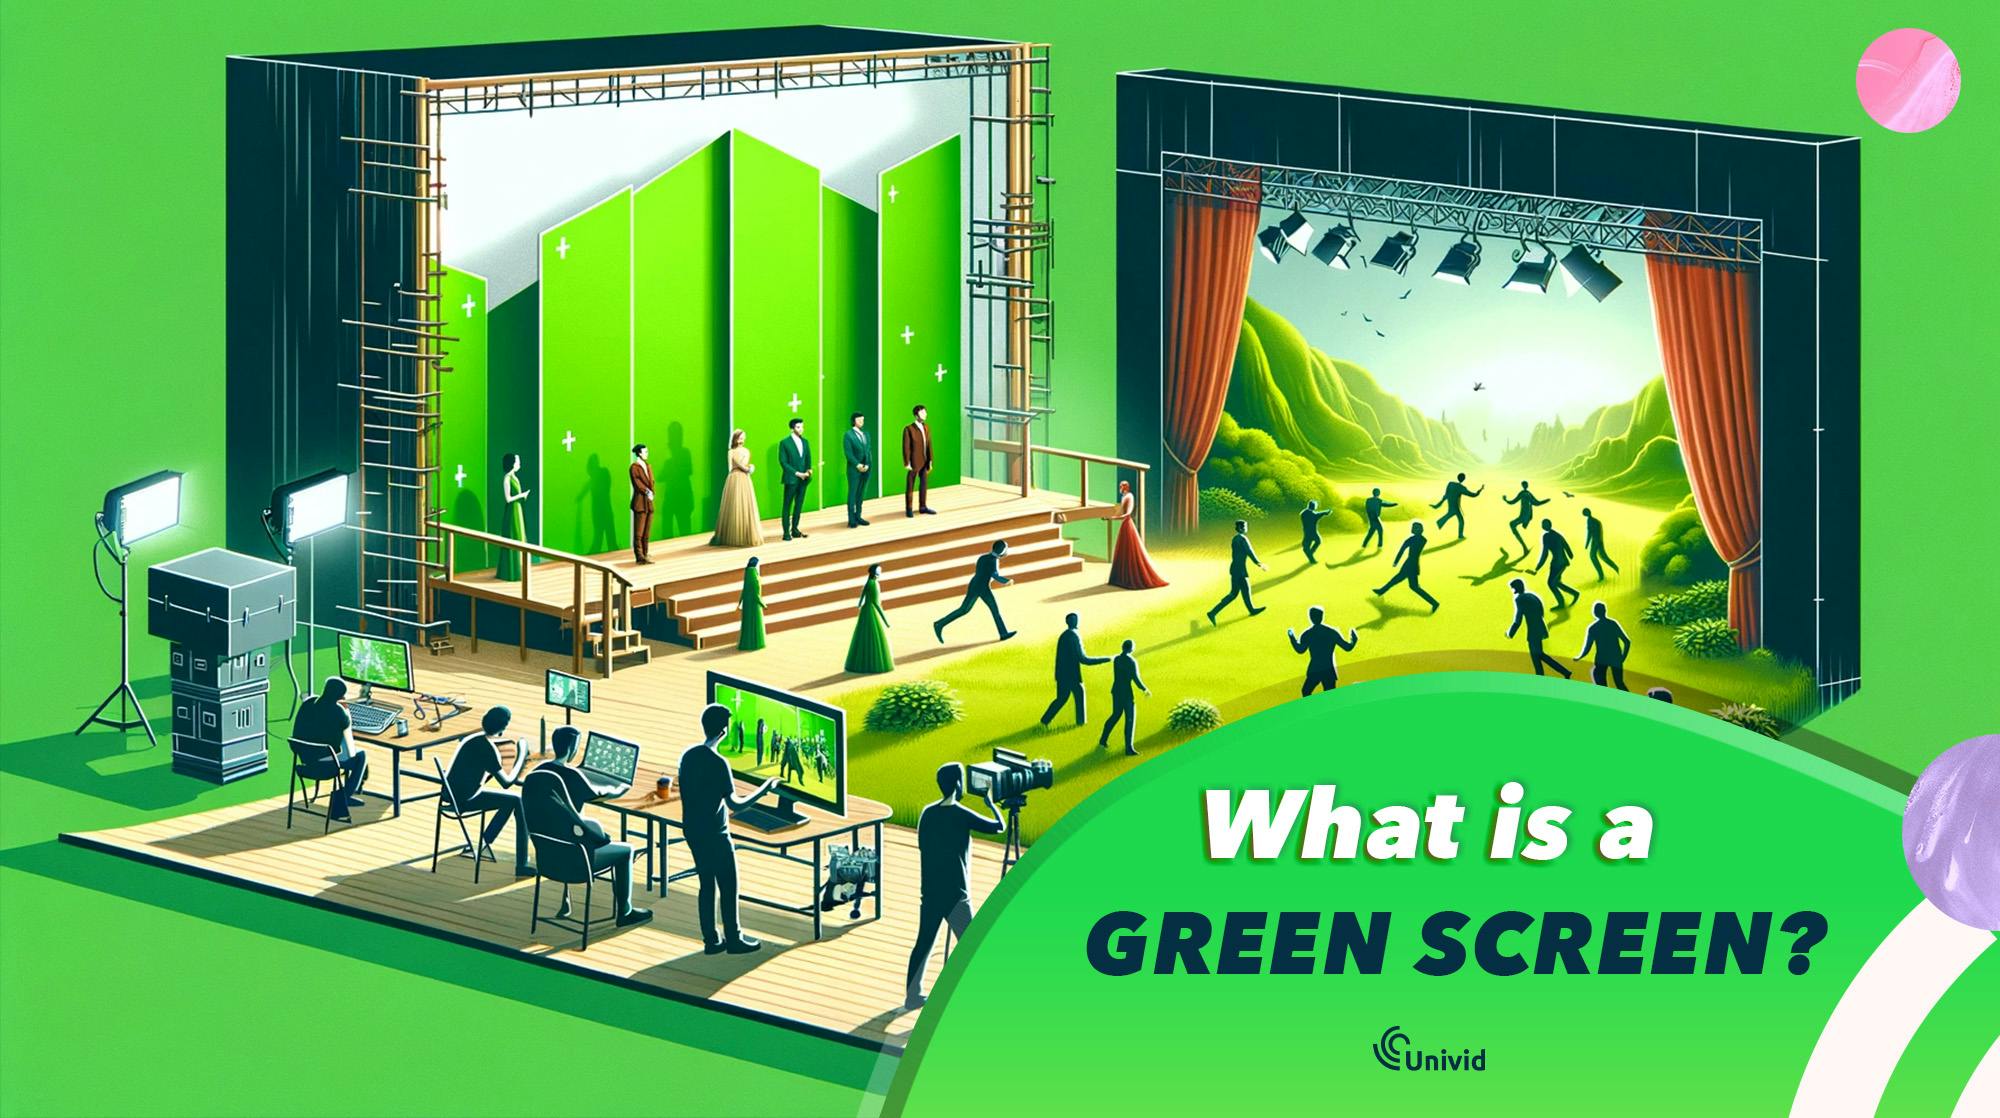 What is a green screen?